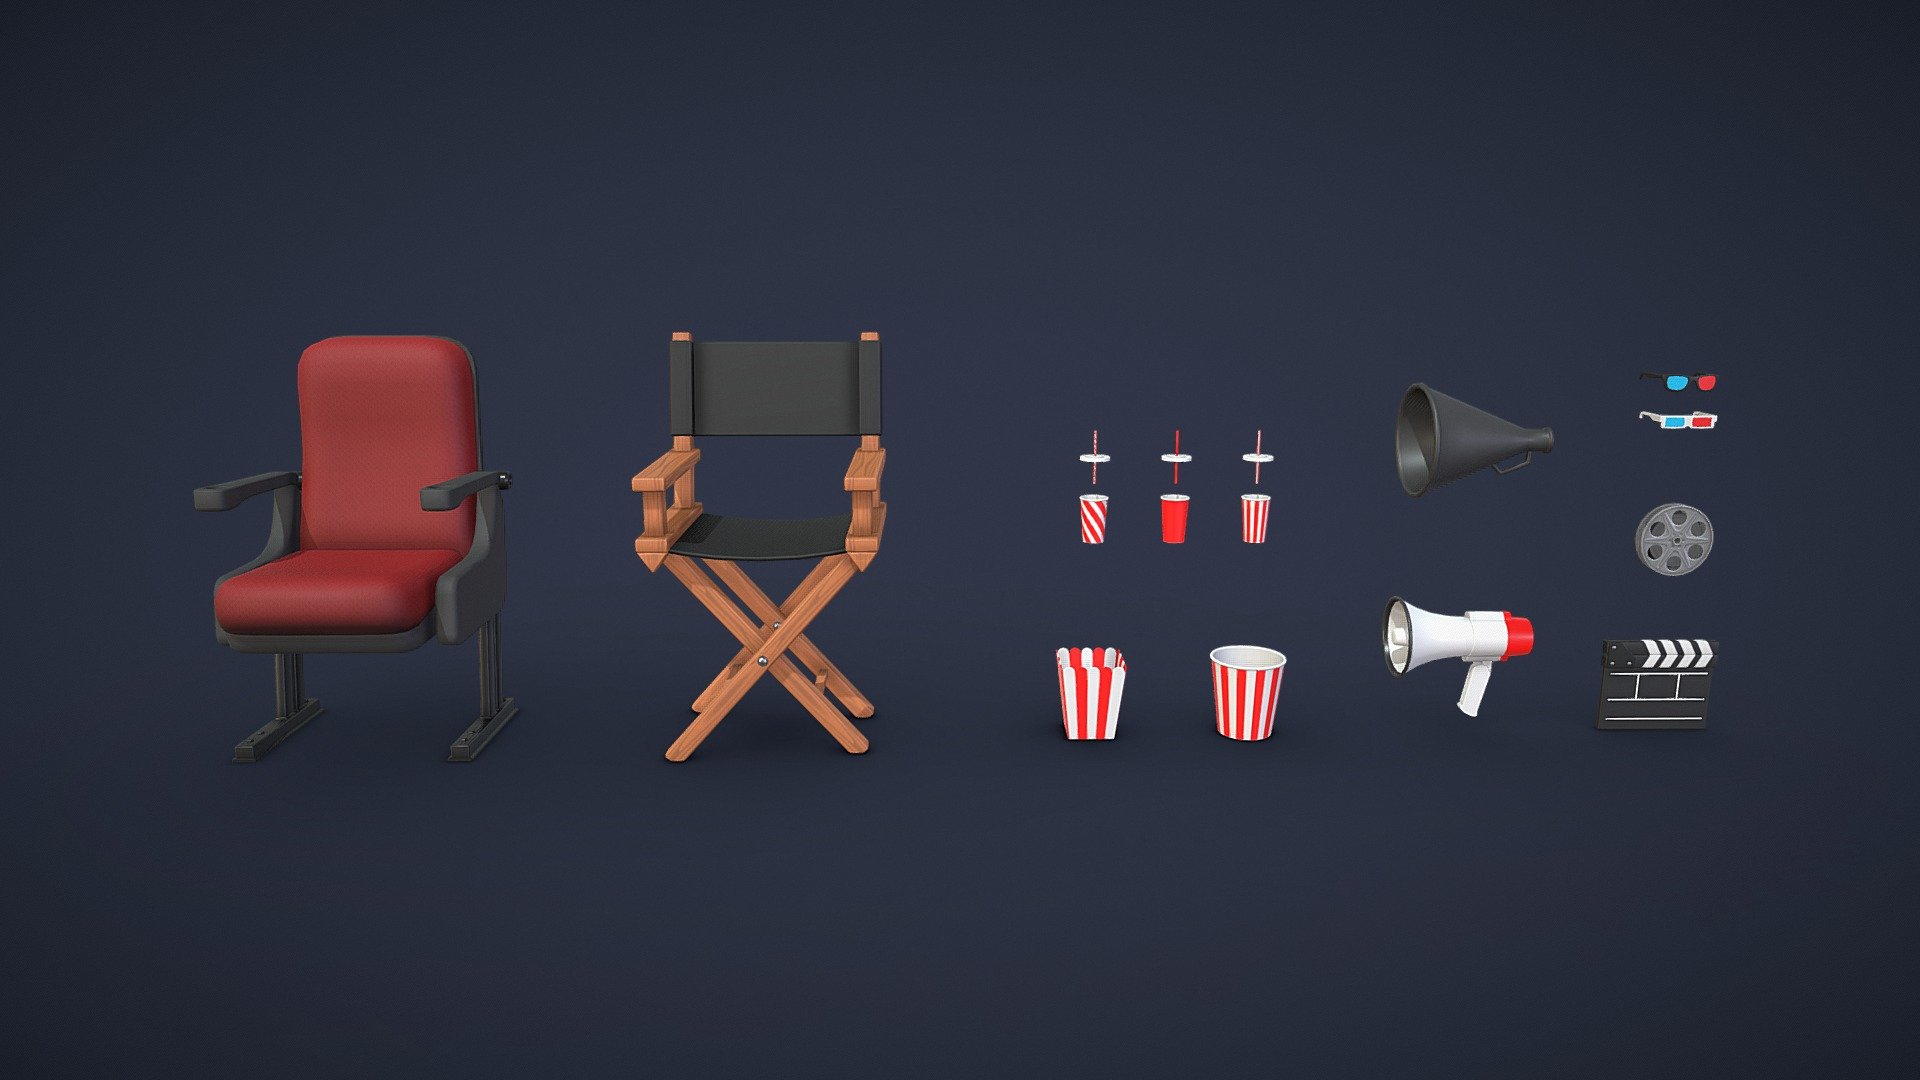 Pack of 13 different models for cinema

Pack include:




3D Glasses - 952 tris

Old 3D Glasses - 428 tris

Cinema Armchair - 4 168 tris

Clapperboard - 576 tris

Director Chair - 864 tris

Drink Cups - 1 344 tris

Film Reel - 1 824 tris

Megaphone - 1 400 tris

Old Megaphone - 1000 tris

Popcorn Cups - 528 and 668 tris

Diffuse, Normal, Roughness and Metallic textures

2048 x 2048 PNG textures

AR / VR / Mobile ready - Cinema Pack - Buy Royalty Free 3D model by Andrii Sedykh (@andriisedykh) 3d model